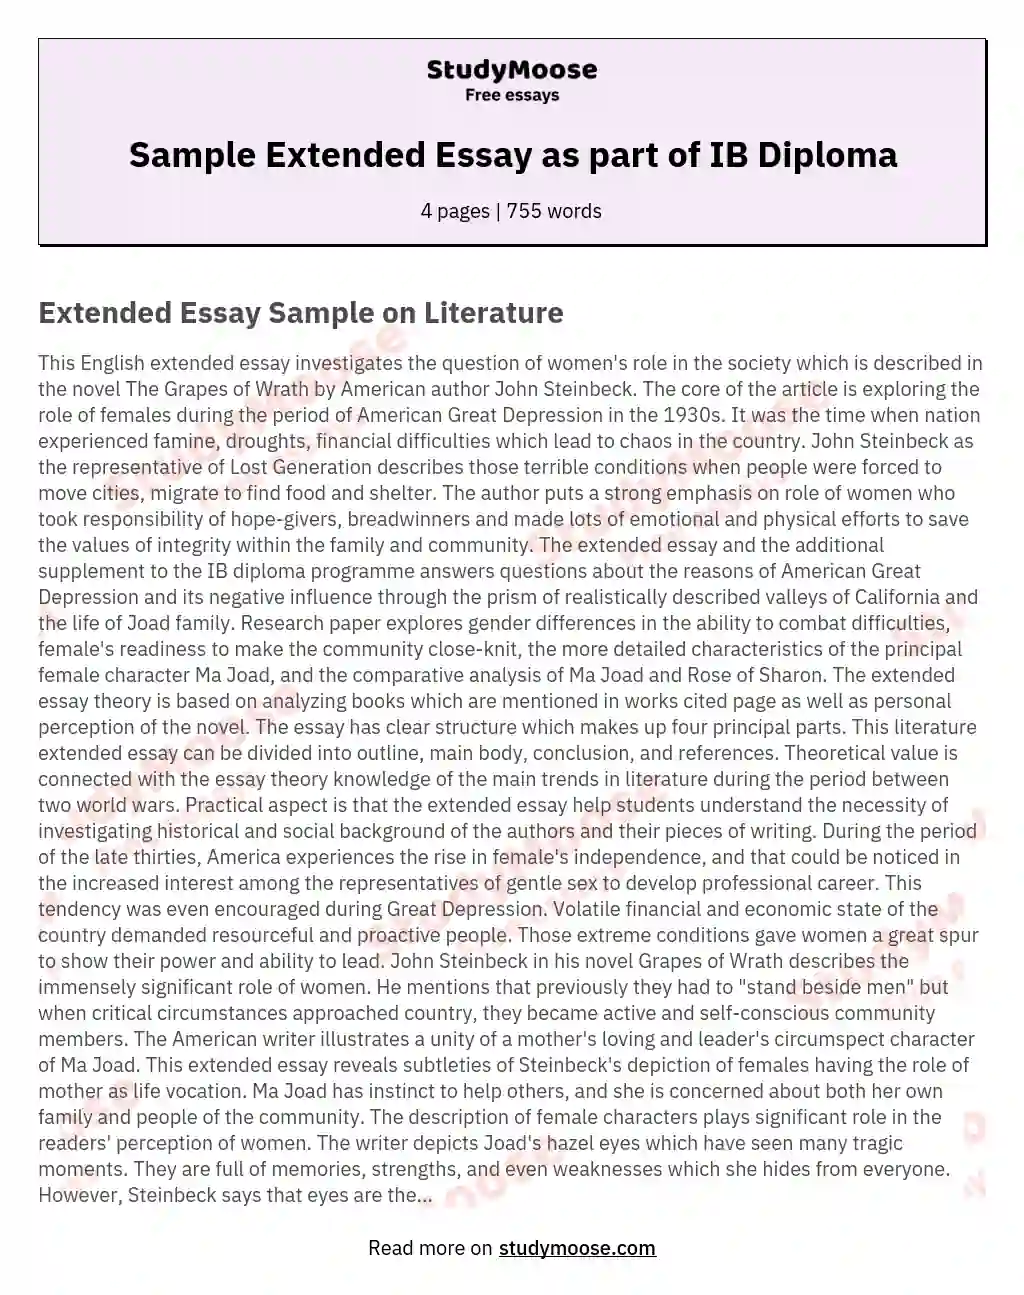 Sample Extended Essay as part of IB Diploma